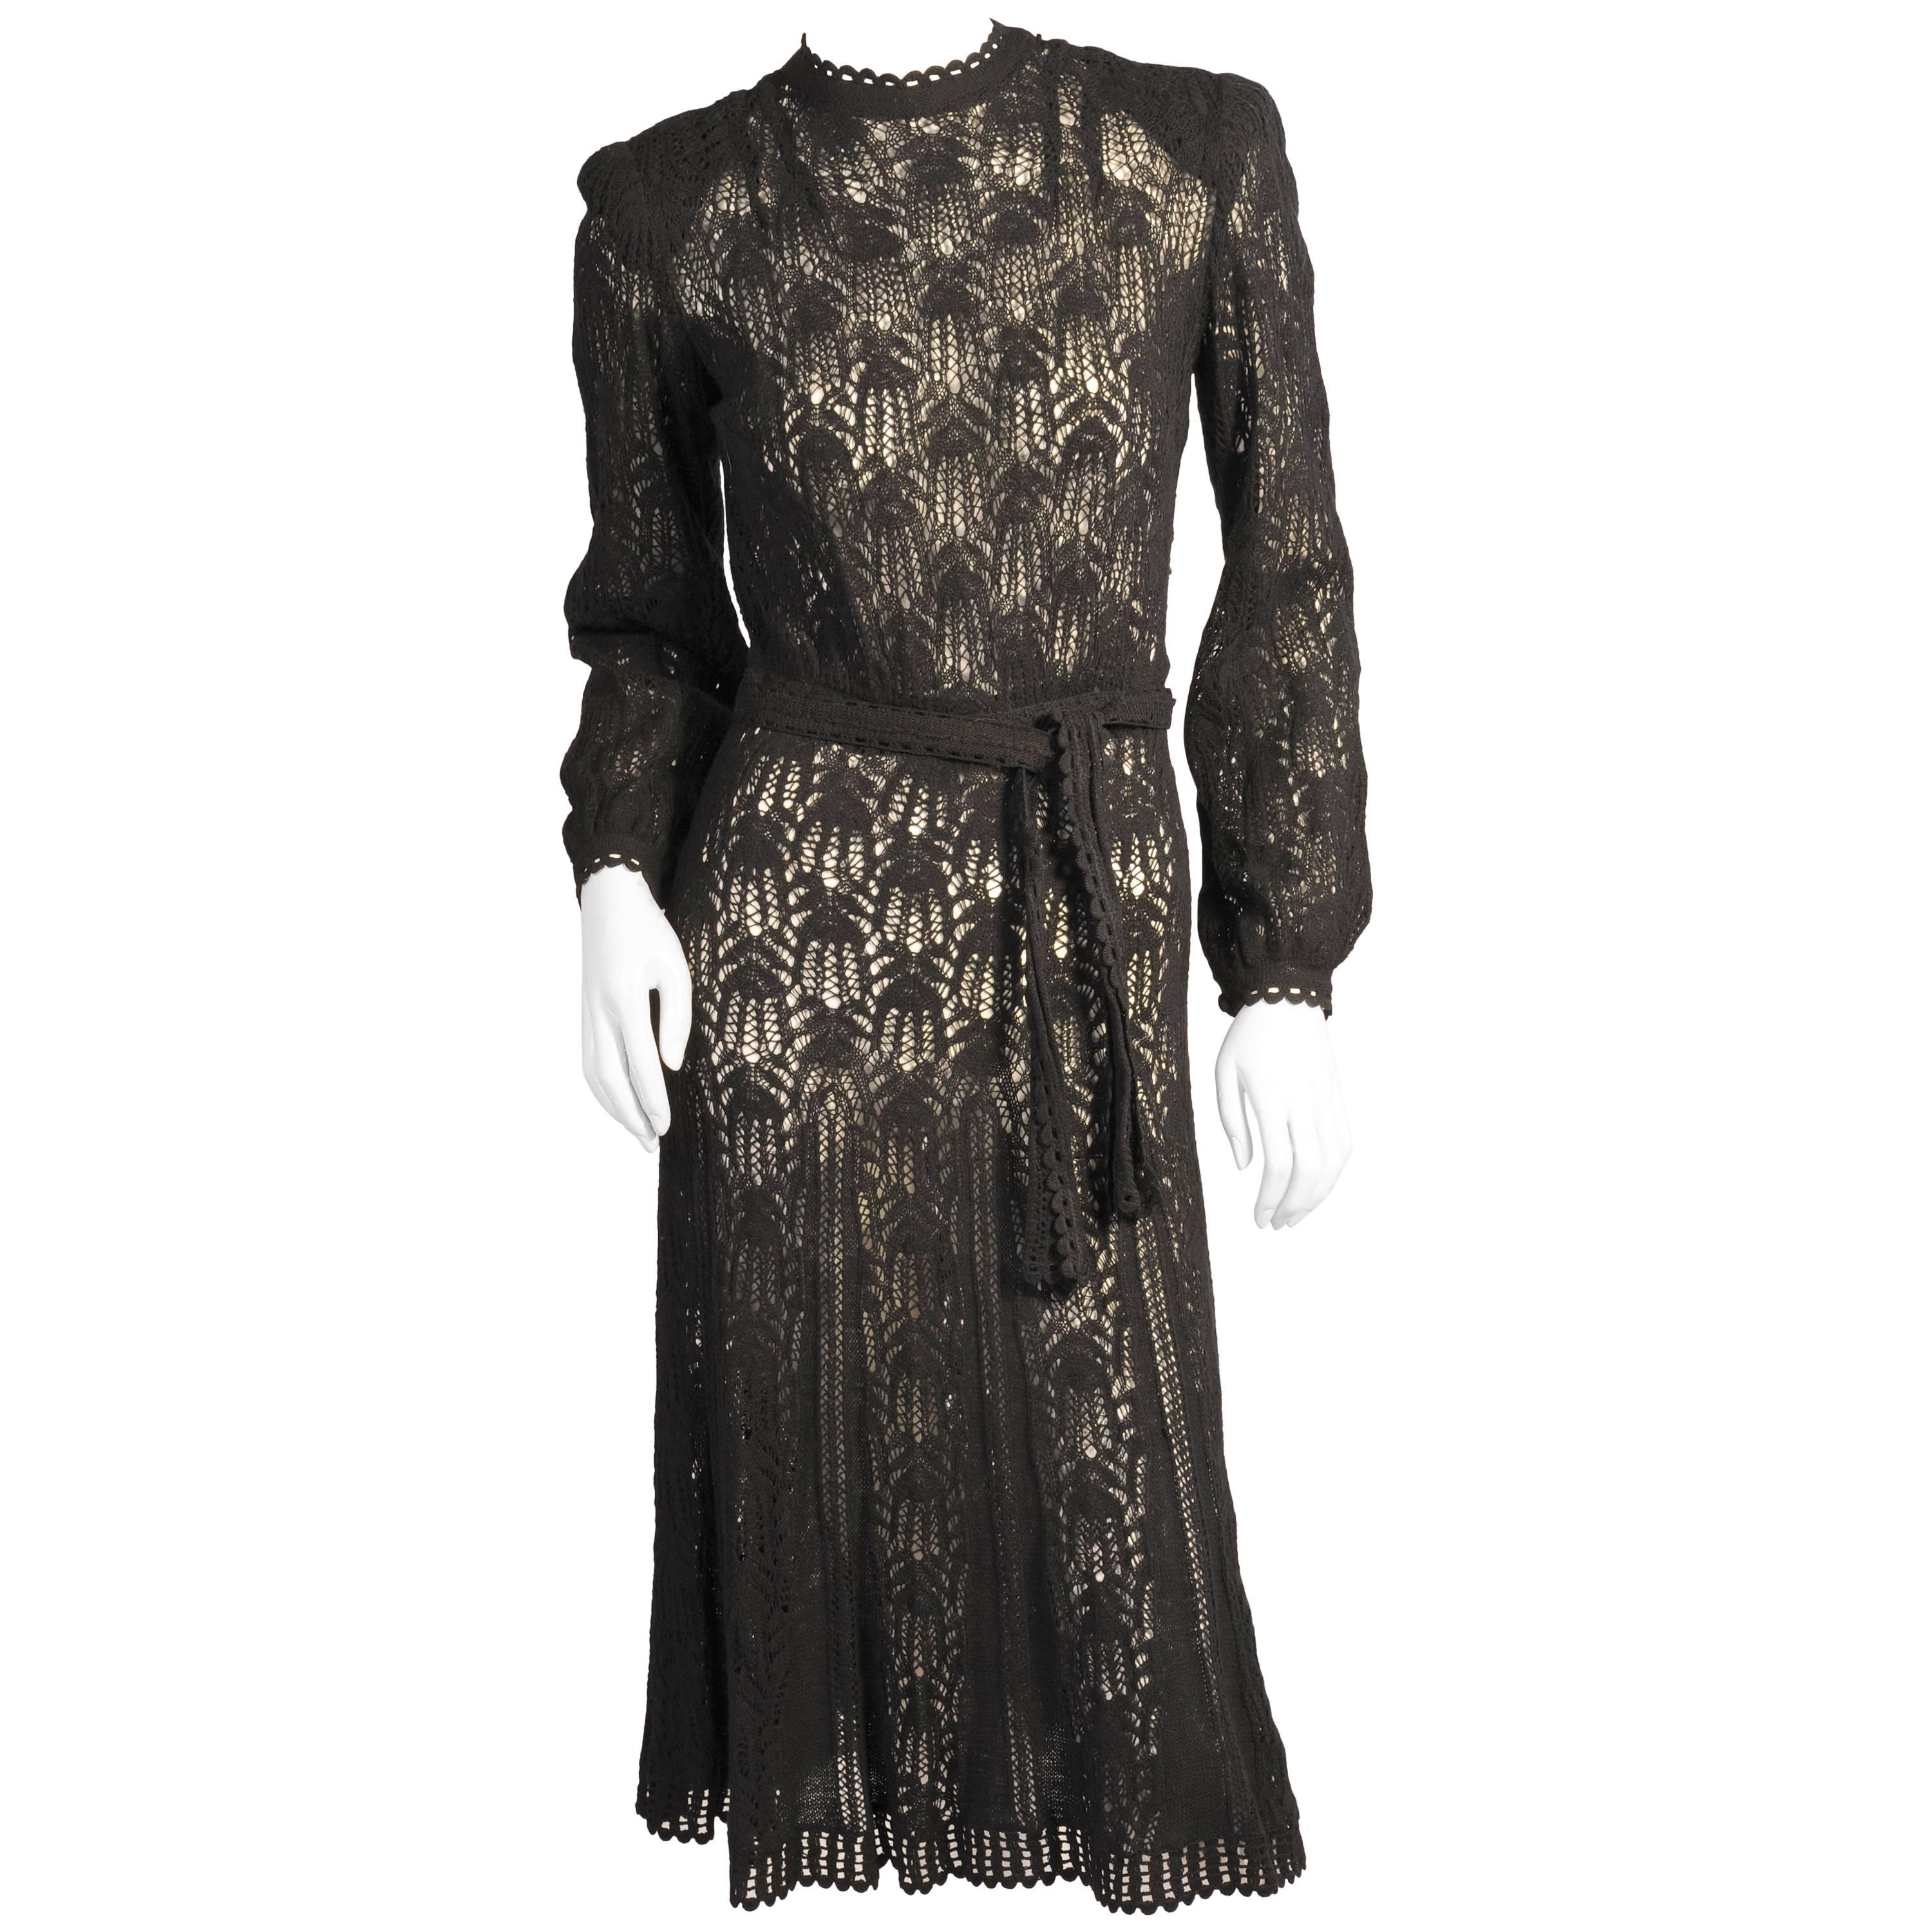 Late 1930's Austrian Lacey Hand Knit Black Dress